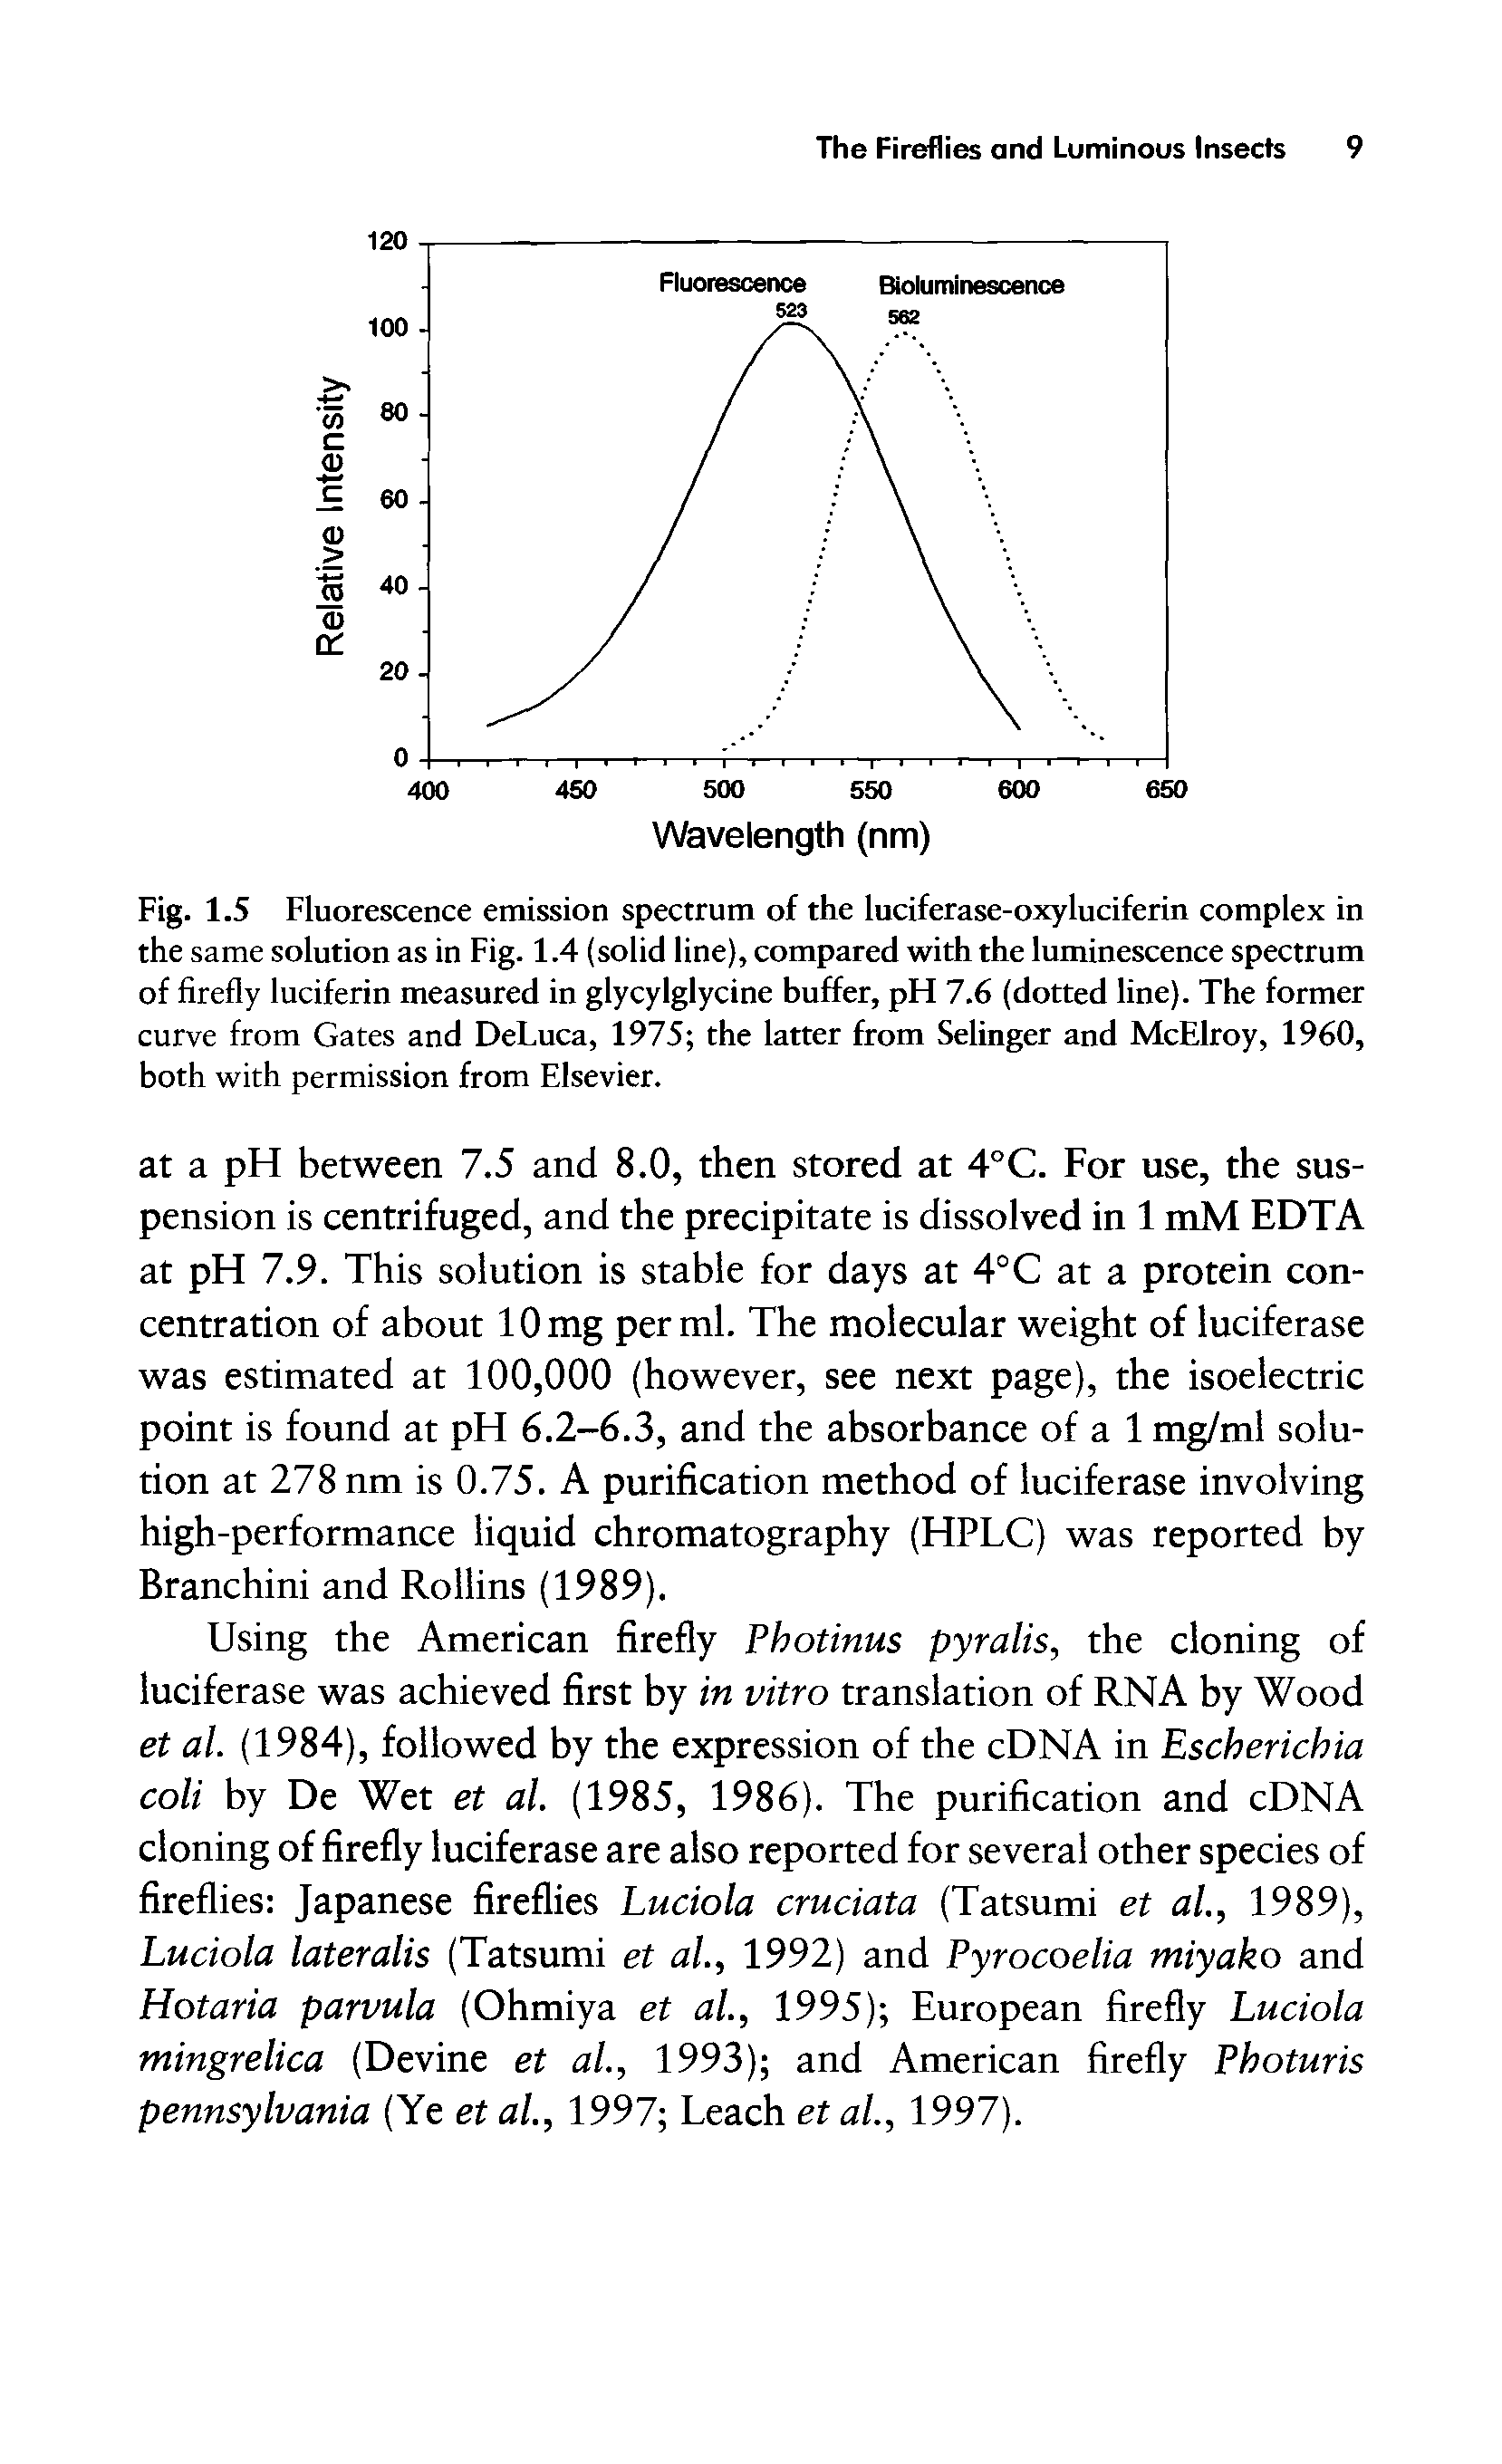 Fig. 1.5 Fluorescence emission spectrum of the luciferase-oxyluciferin complex in the same solution as in Fig. 1.4 (solid line), compared with the luminescence spectrum of firefly luciferin measured in glycylglycine buffer, pH 7.6 (dotted line). The former curve from Gates and DeLuca, 1975 the latter from Selinger and McElroy, 1960, both with permission from Elsevier.